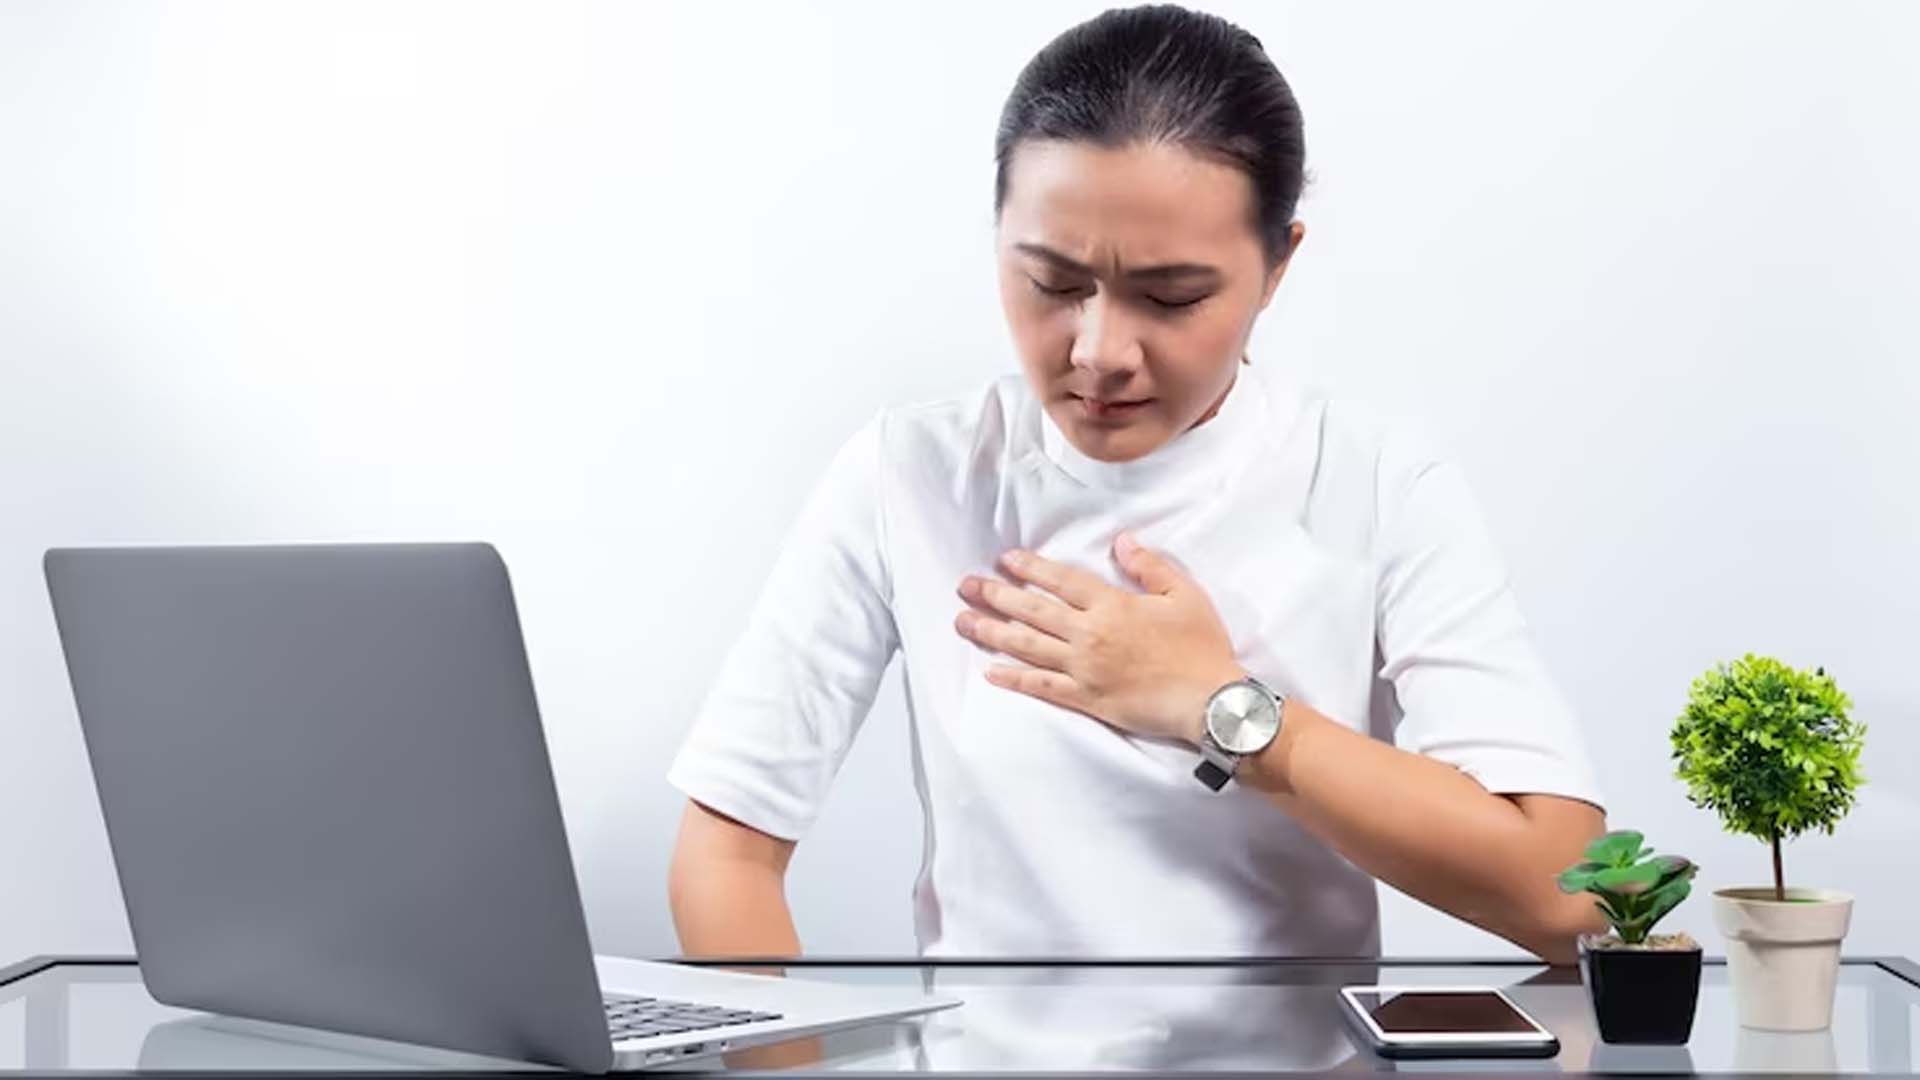 Women with Chest Pain